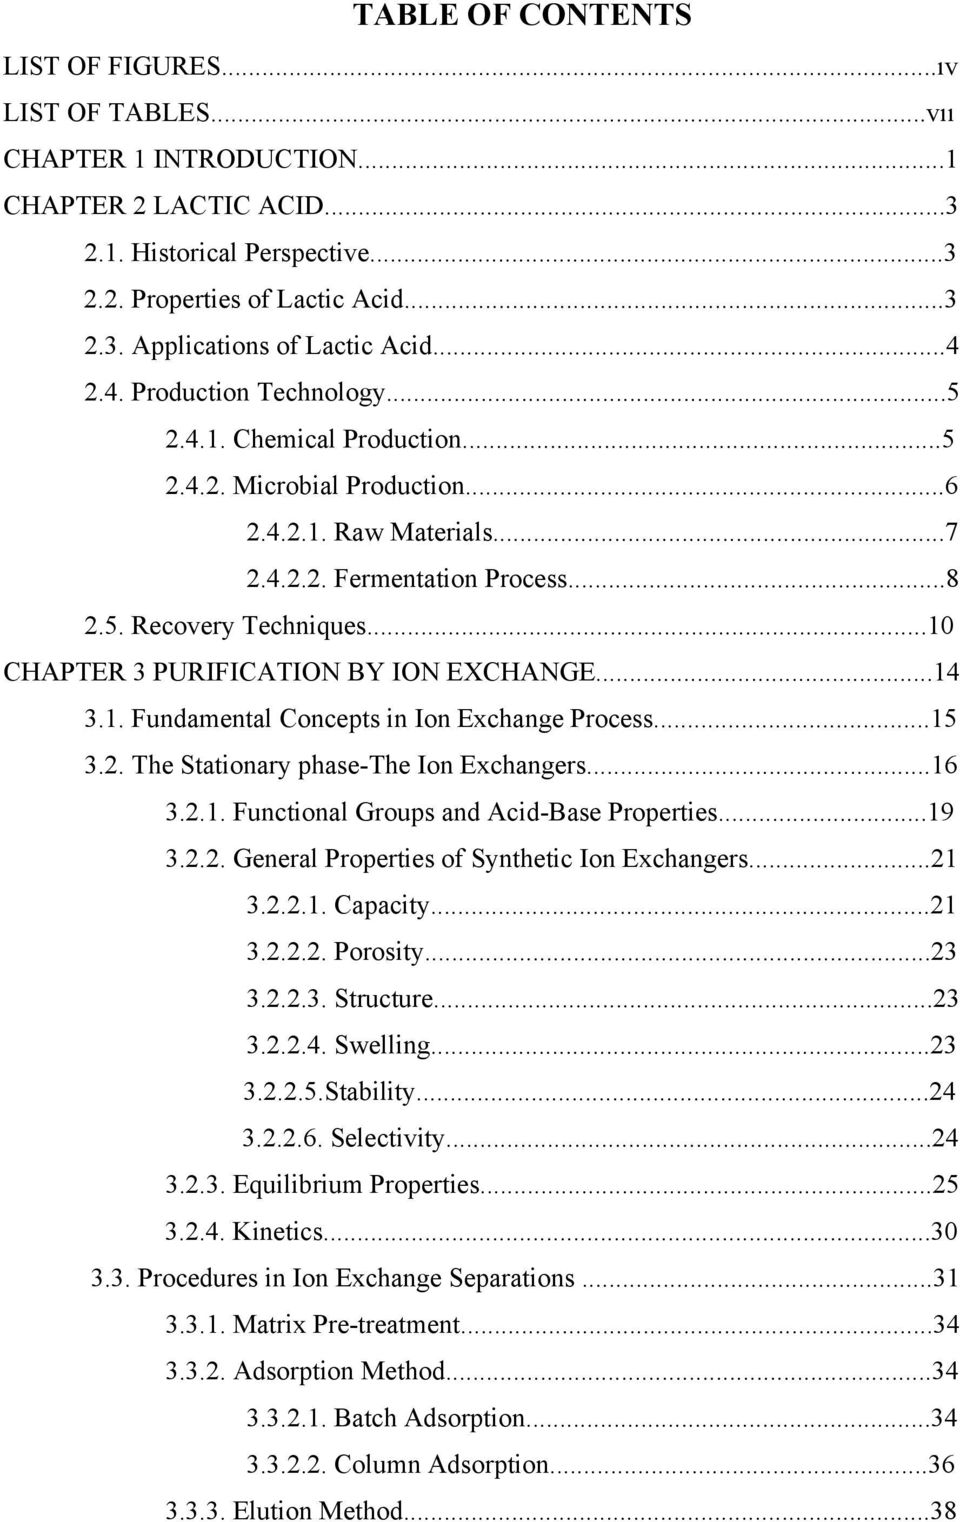 ..10 CHAPTER 3 PURIFICATION BY ION EXCHANGE...14 3.1. Fundamental Concepts in Ion Exchange Process...15 3.2. The Stationary phase-the Ion Exchangers...16 3.2.1. Functional Groups and Acid-Base Properties.